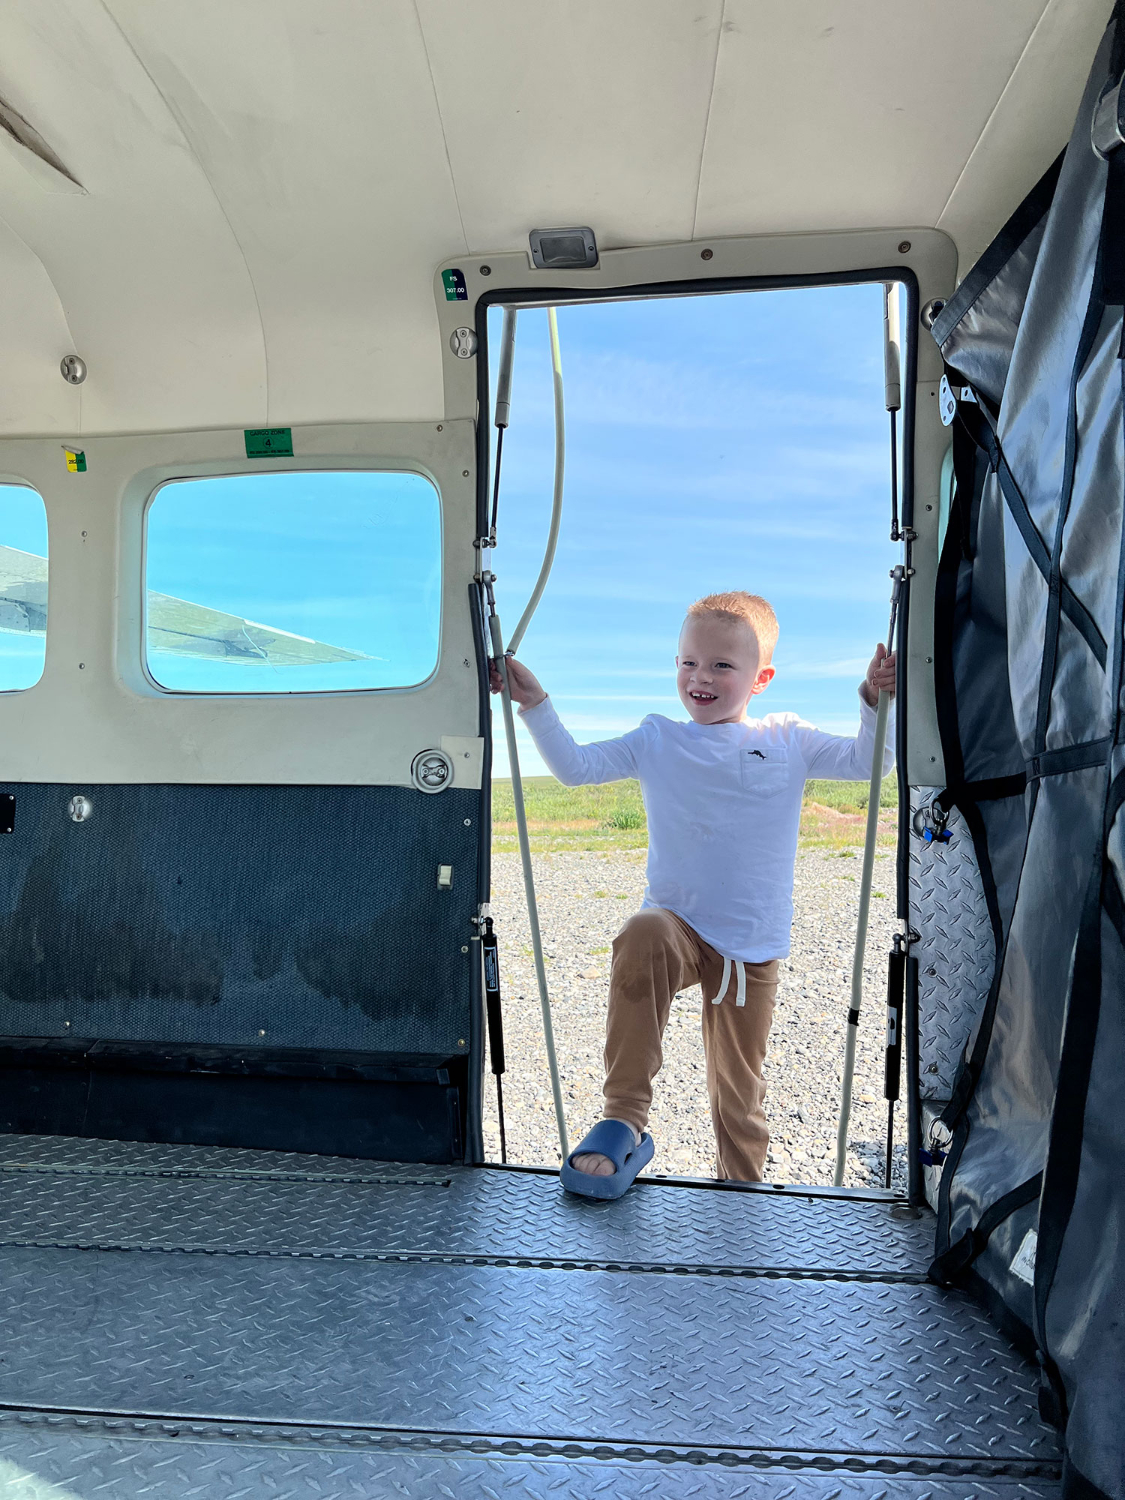 Knox Neumayr Riding a Private Plane For The First Time